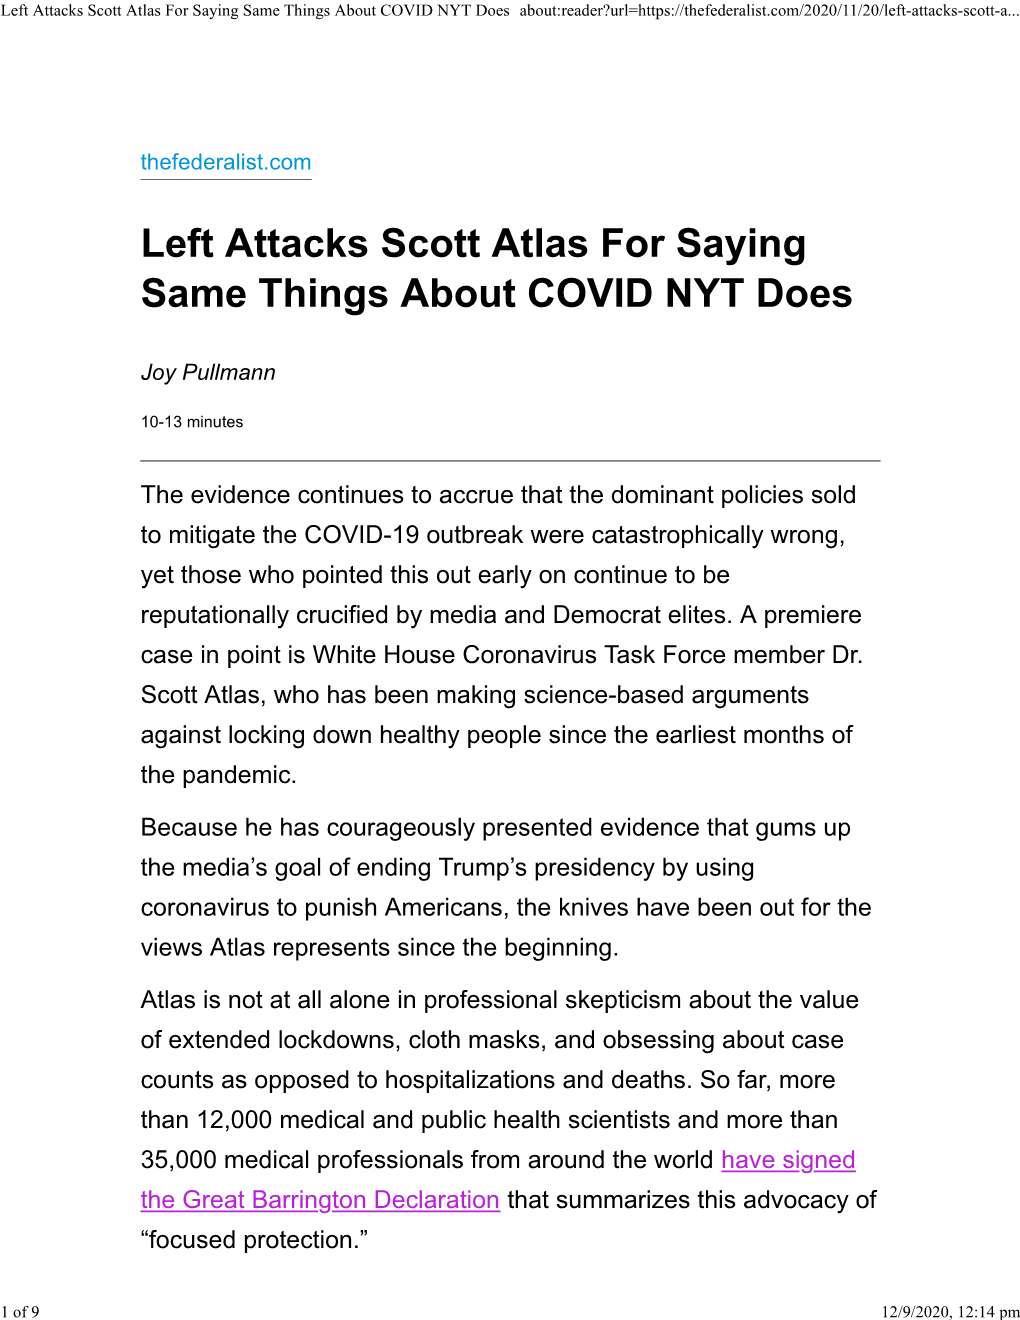 Left Attacks Scott Atlas for Saying Same Things About COVID NYT Does About:Reader?Url=